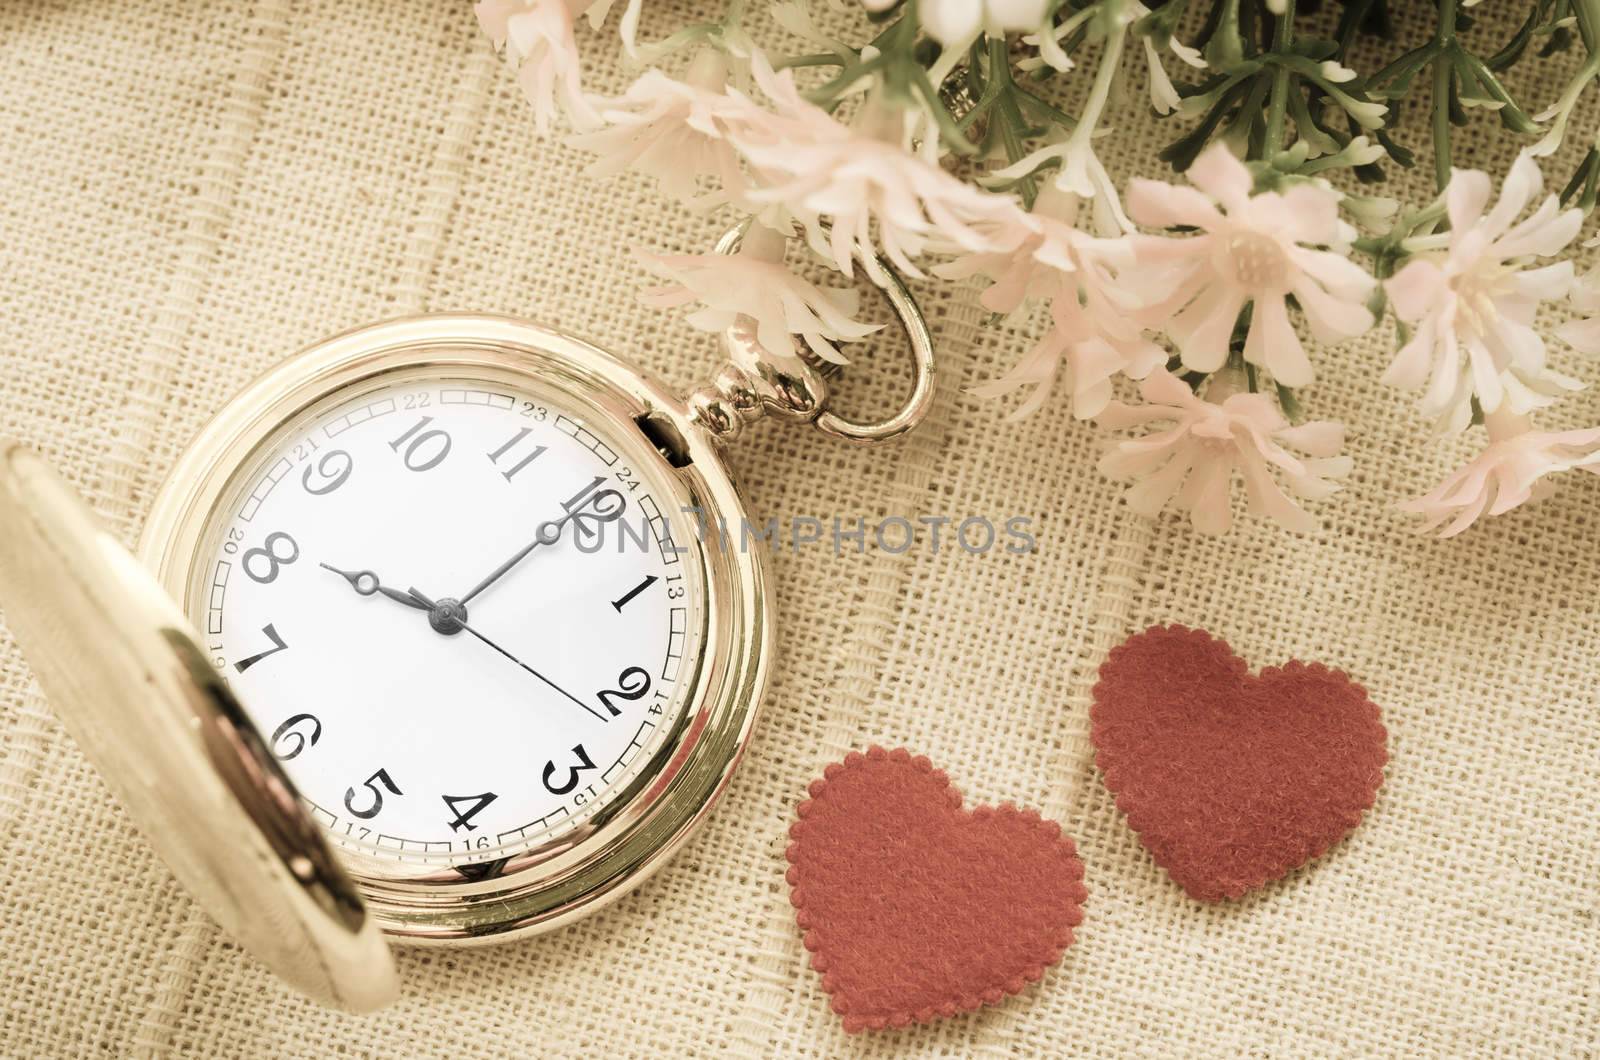 Gold pocket watch and red heart with flower on sack background. Love concept.